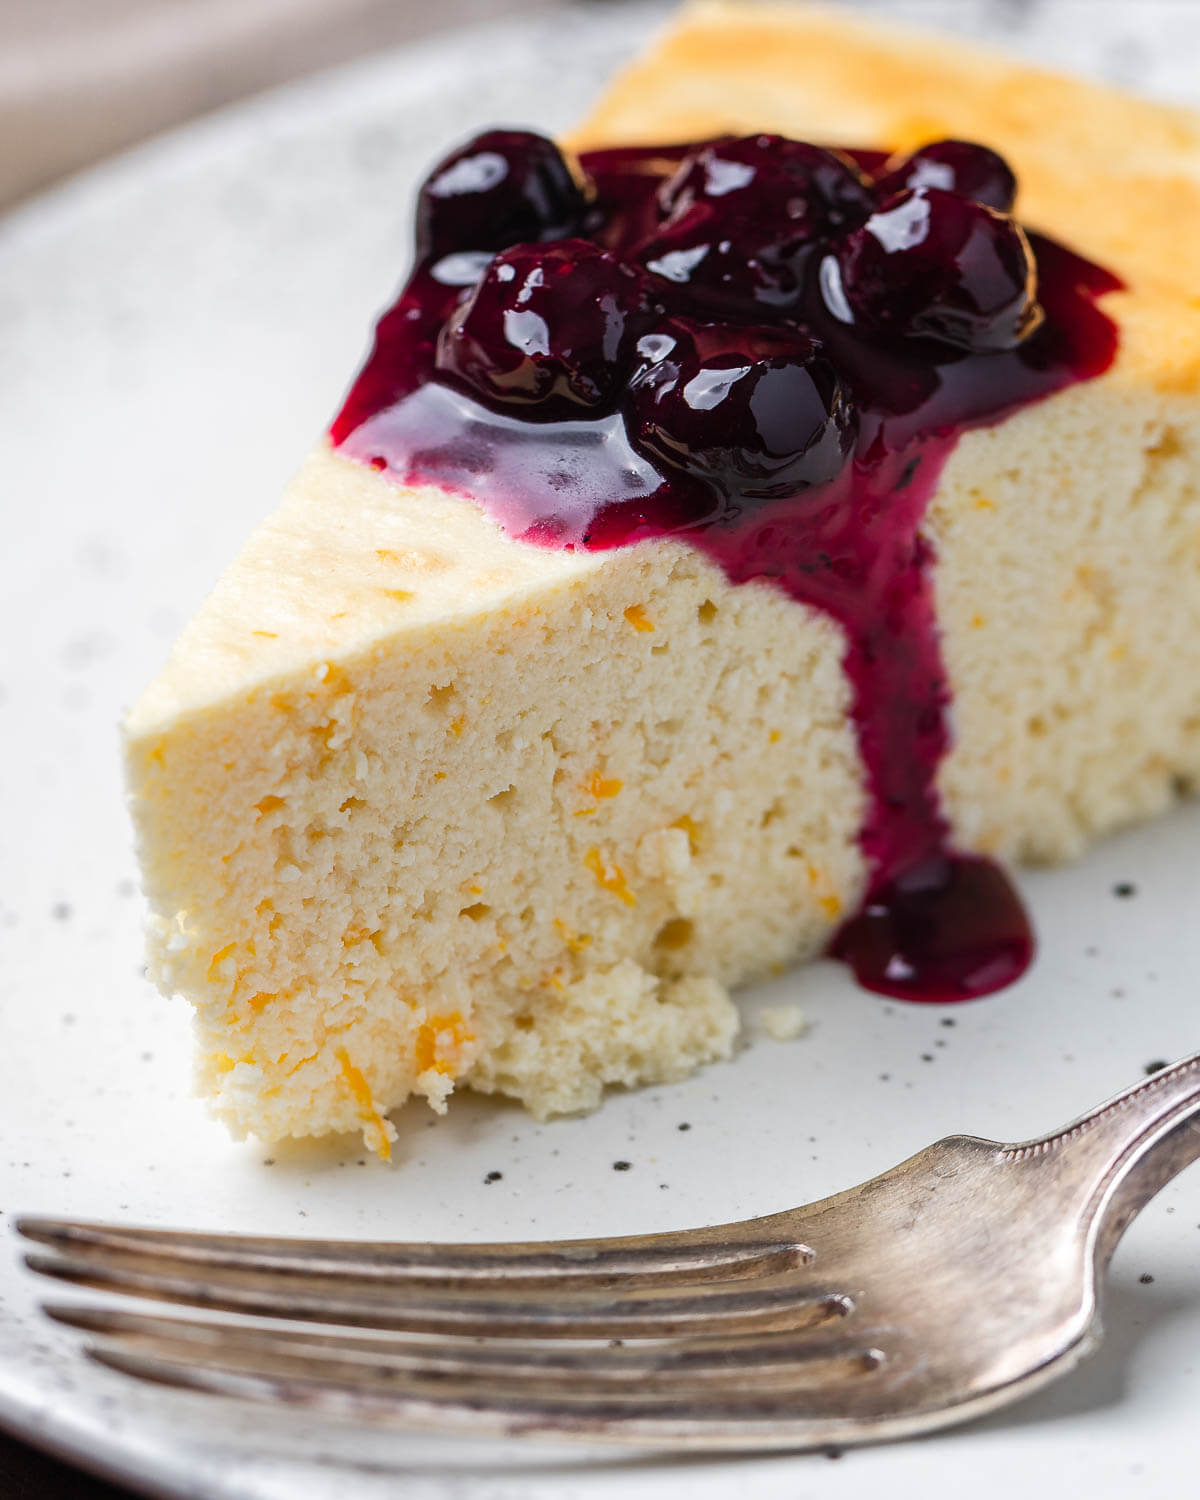 Closeup shot of Italian cheesecake with blueberry sauce on white plate.